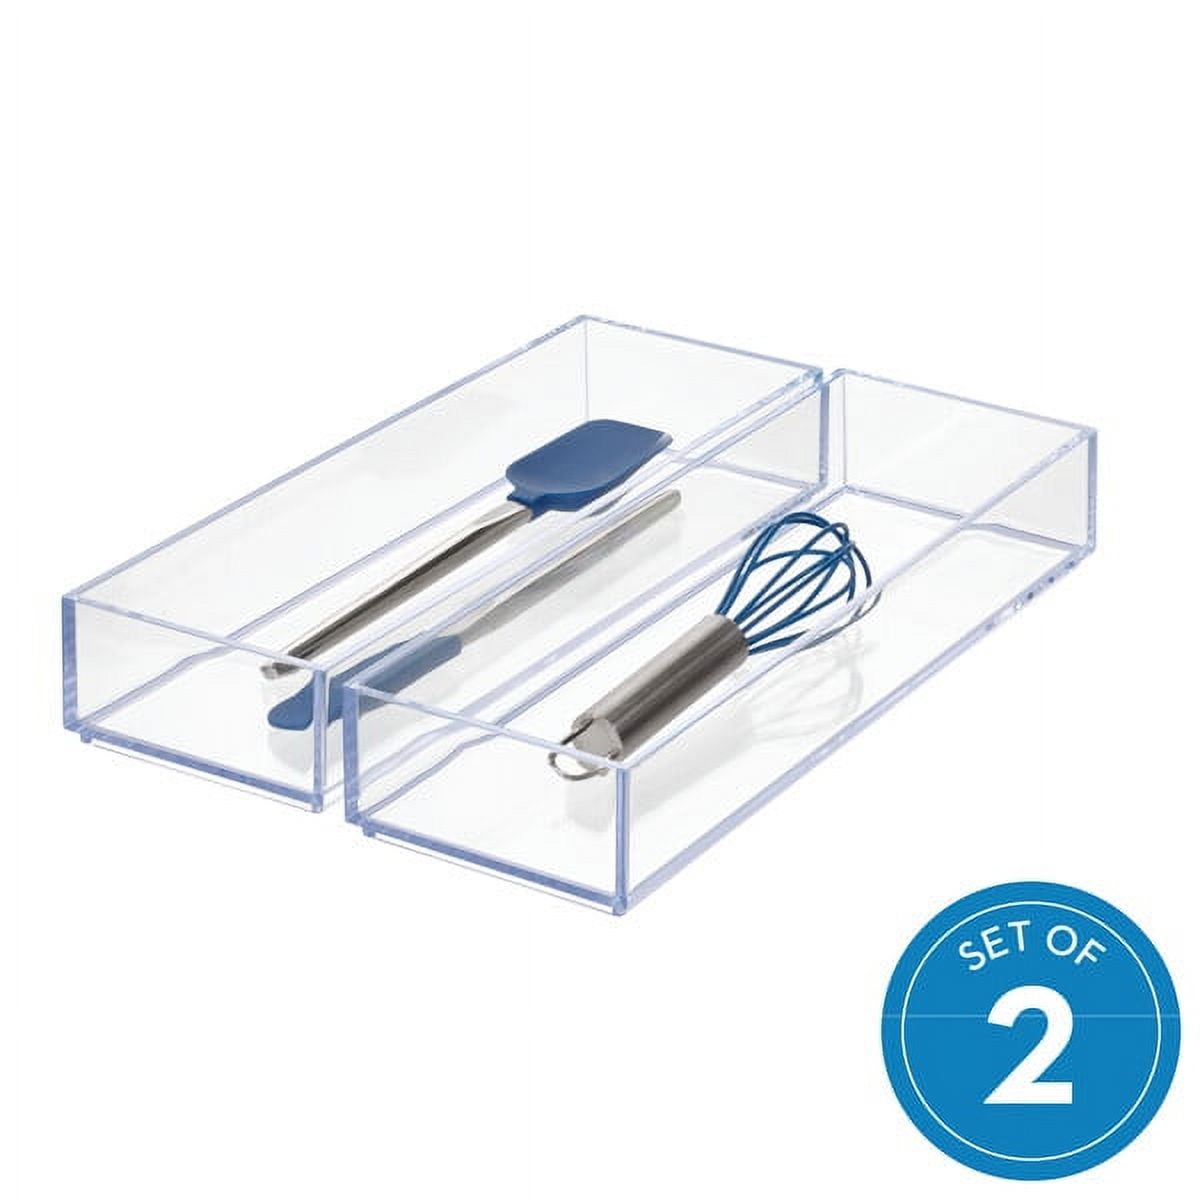 23 PCS Clear Plastic Drawer Organizers Set, CHEFSTORY 4-Size